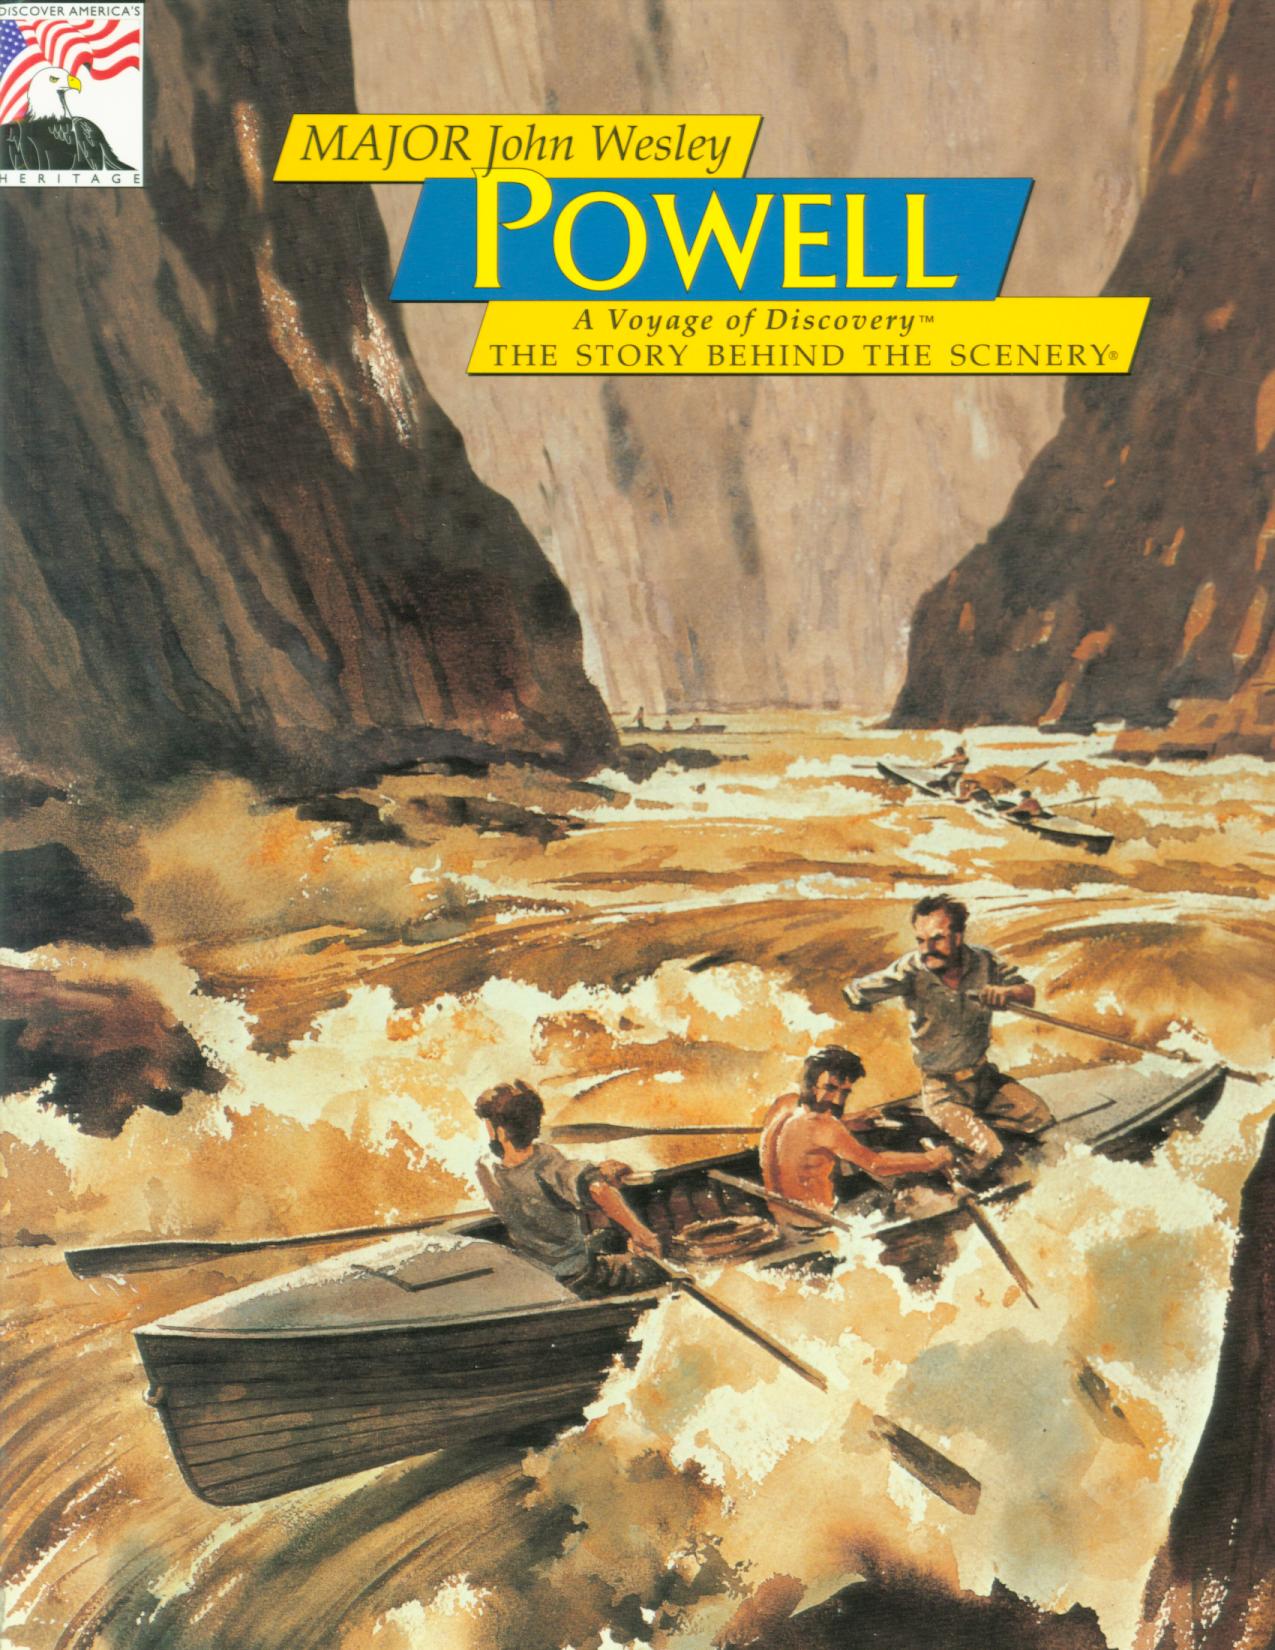 MAJOR JOHN WESLEY POWELL: voyage of discovery--the story behind the scenery. by Dan Murphy.